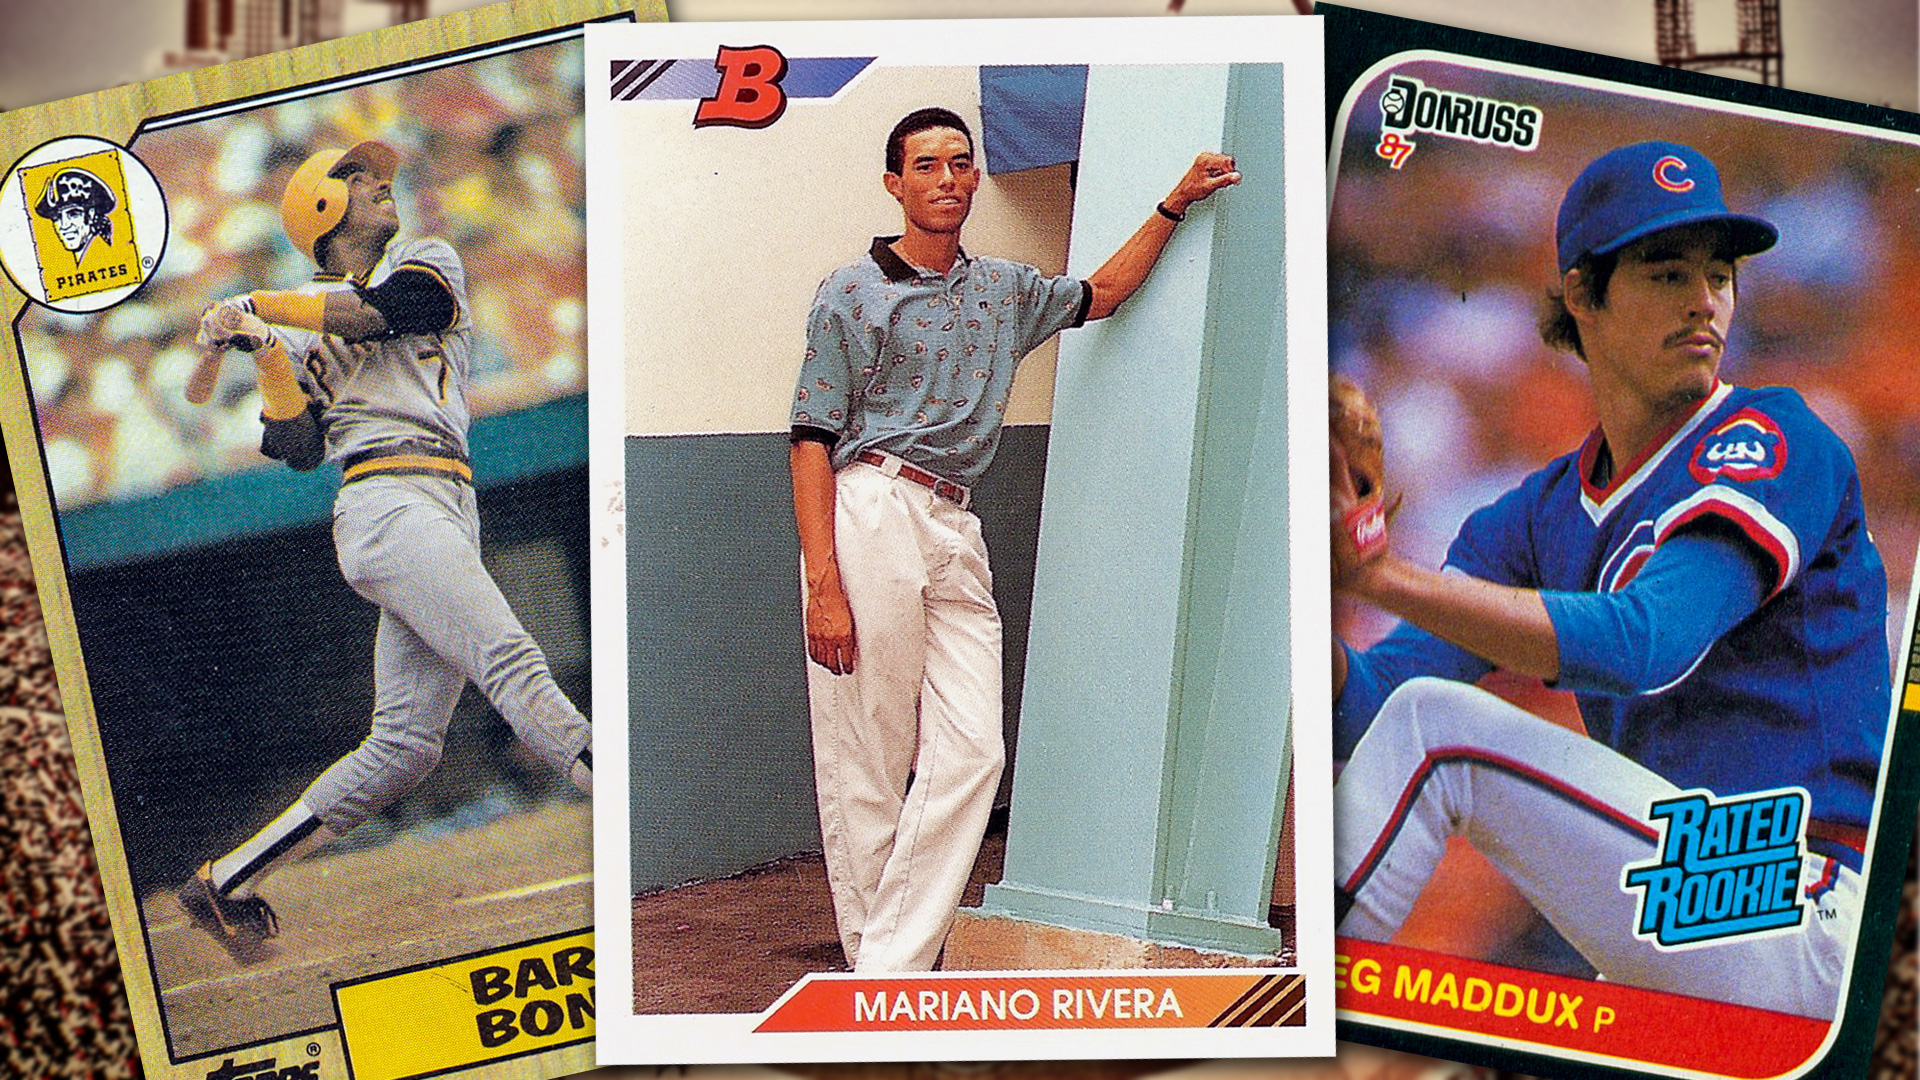 We love the '80s (and '90s) baseball cards: The top 15 sets of the era | Sporting News1920 x 1080